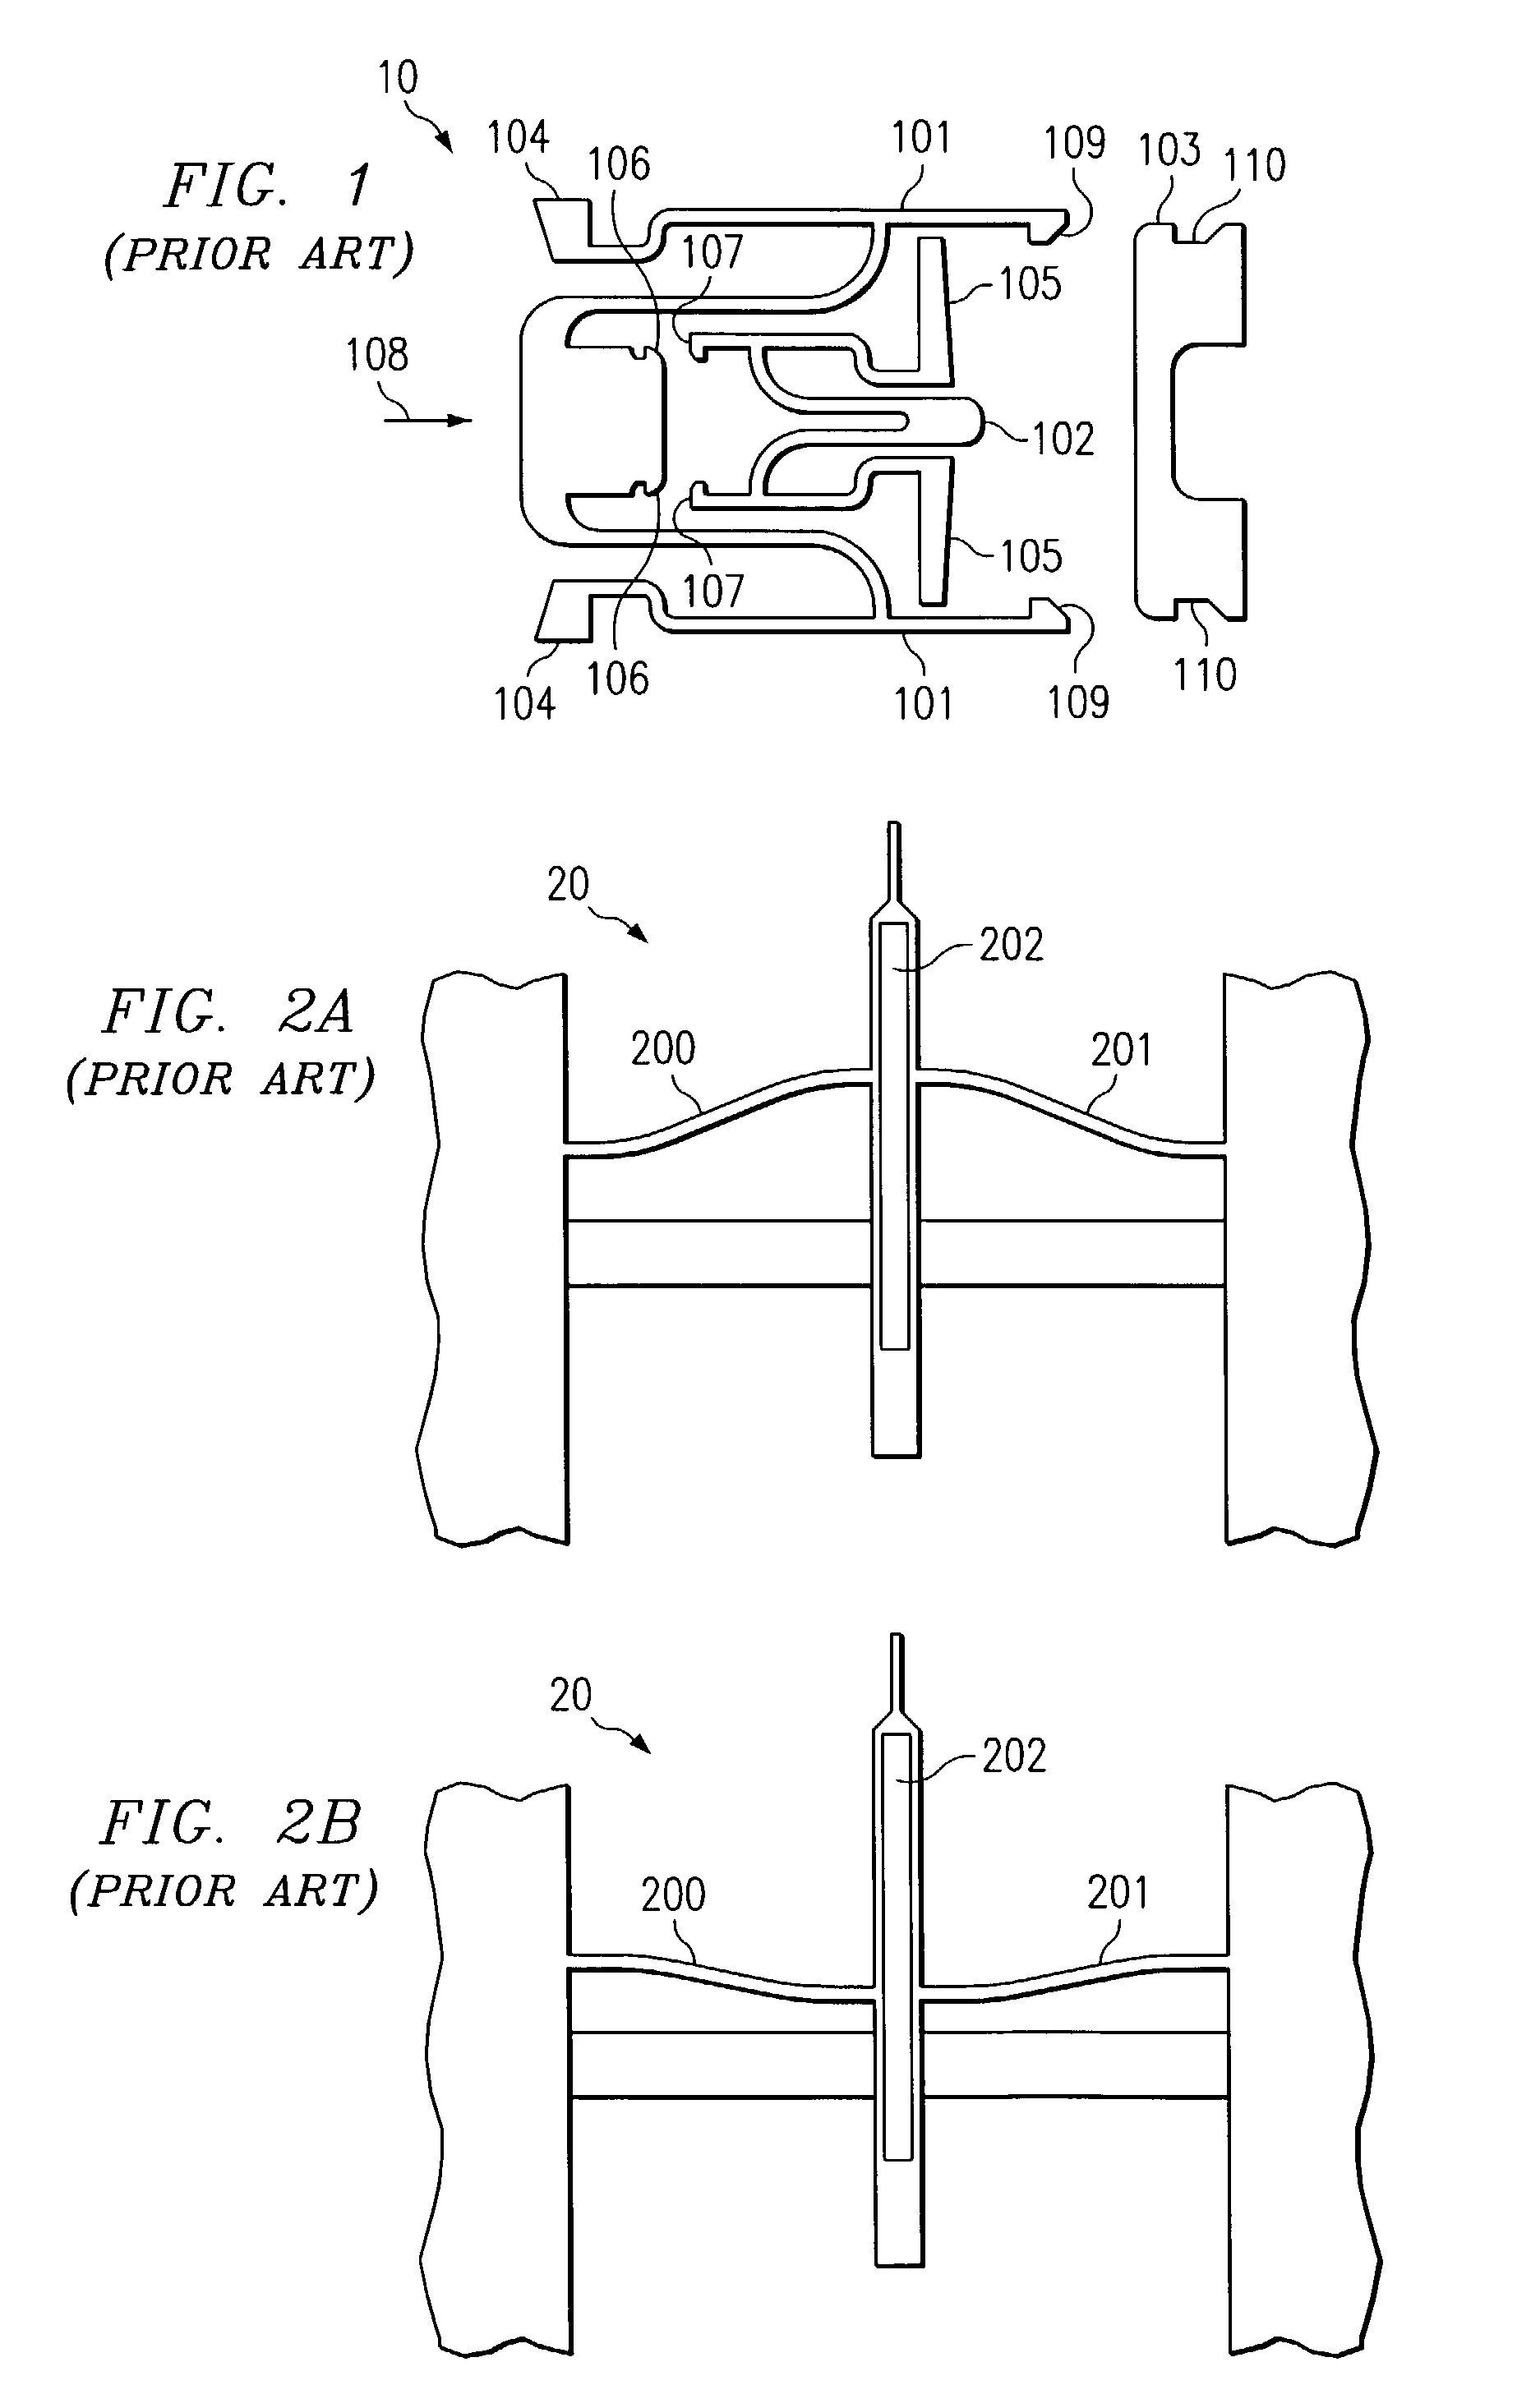 Storing mechanical potential in a MEMS device using a mechanically multi-stable mechanism